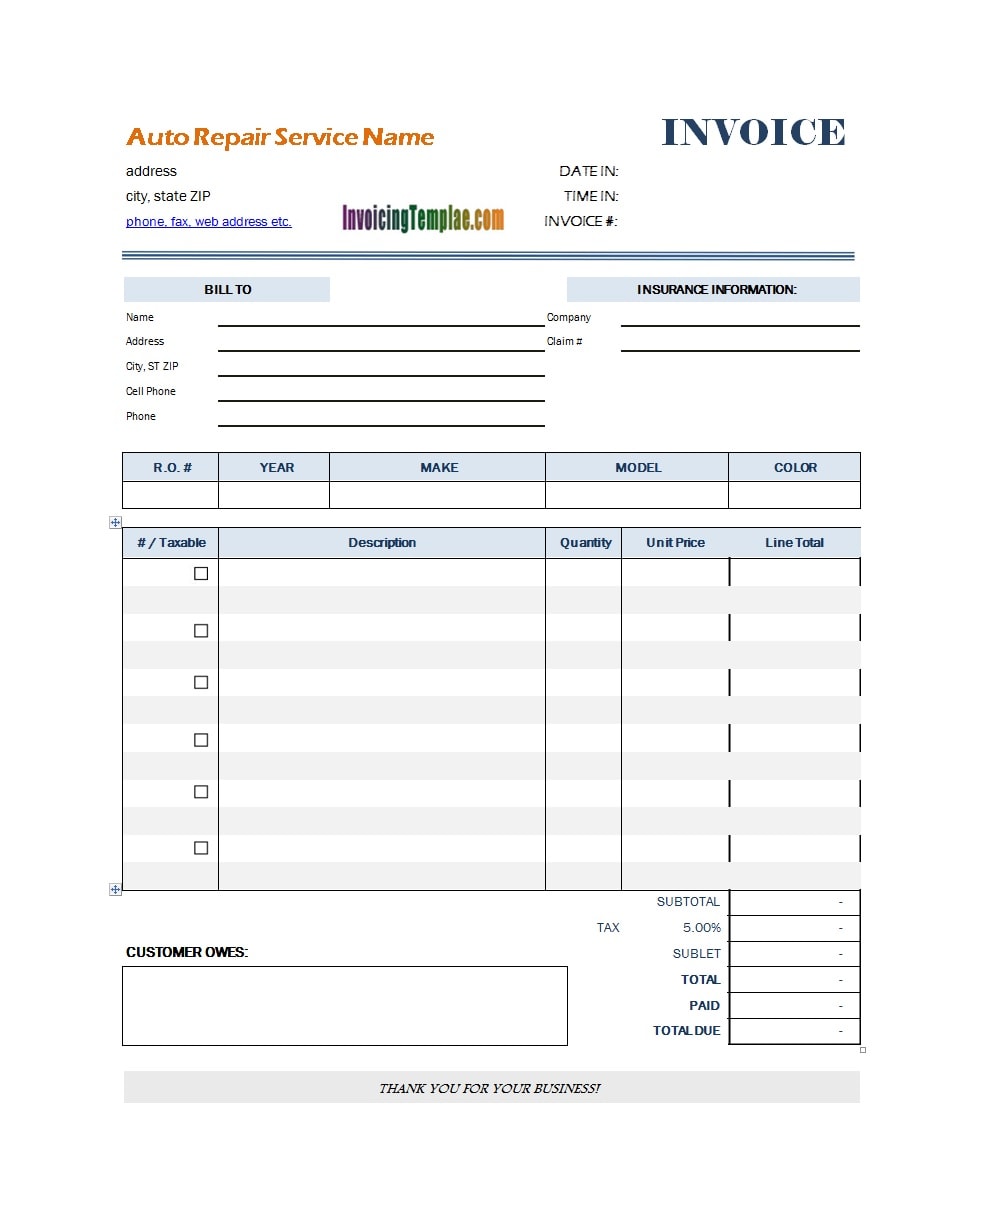 23 Simple Service Invoice Templates [MS Word] - TemplateArchive Throughout Mobile Phone Invoice Template